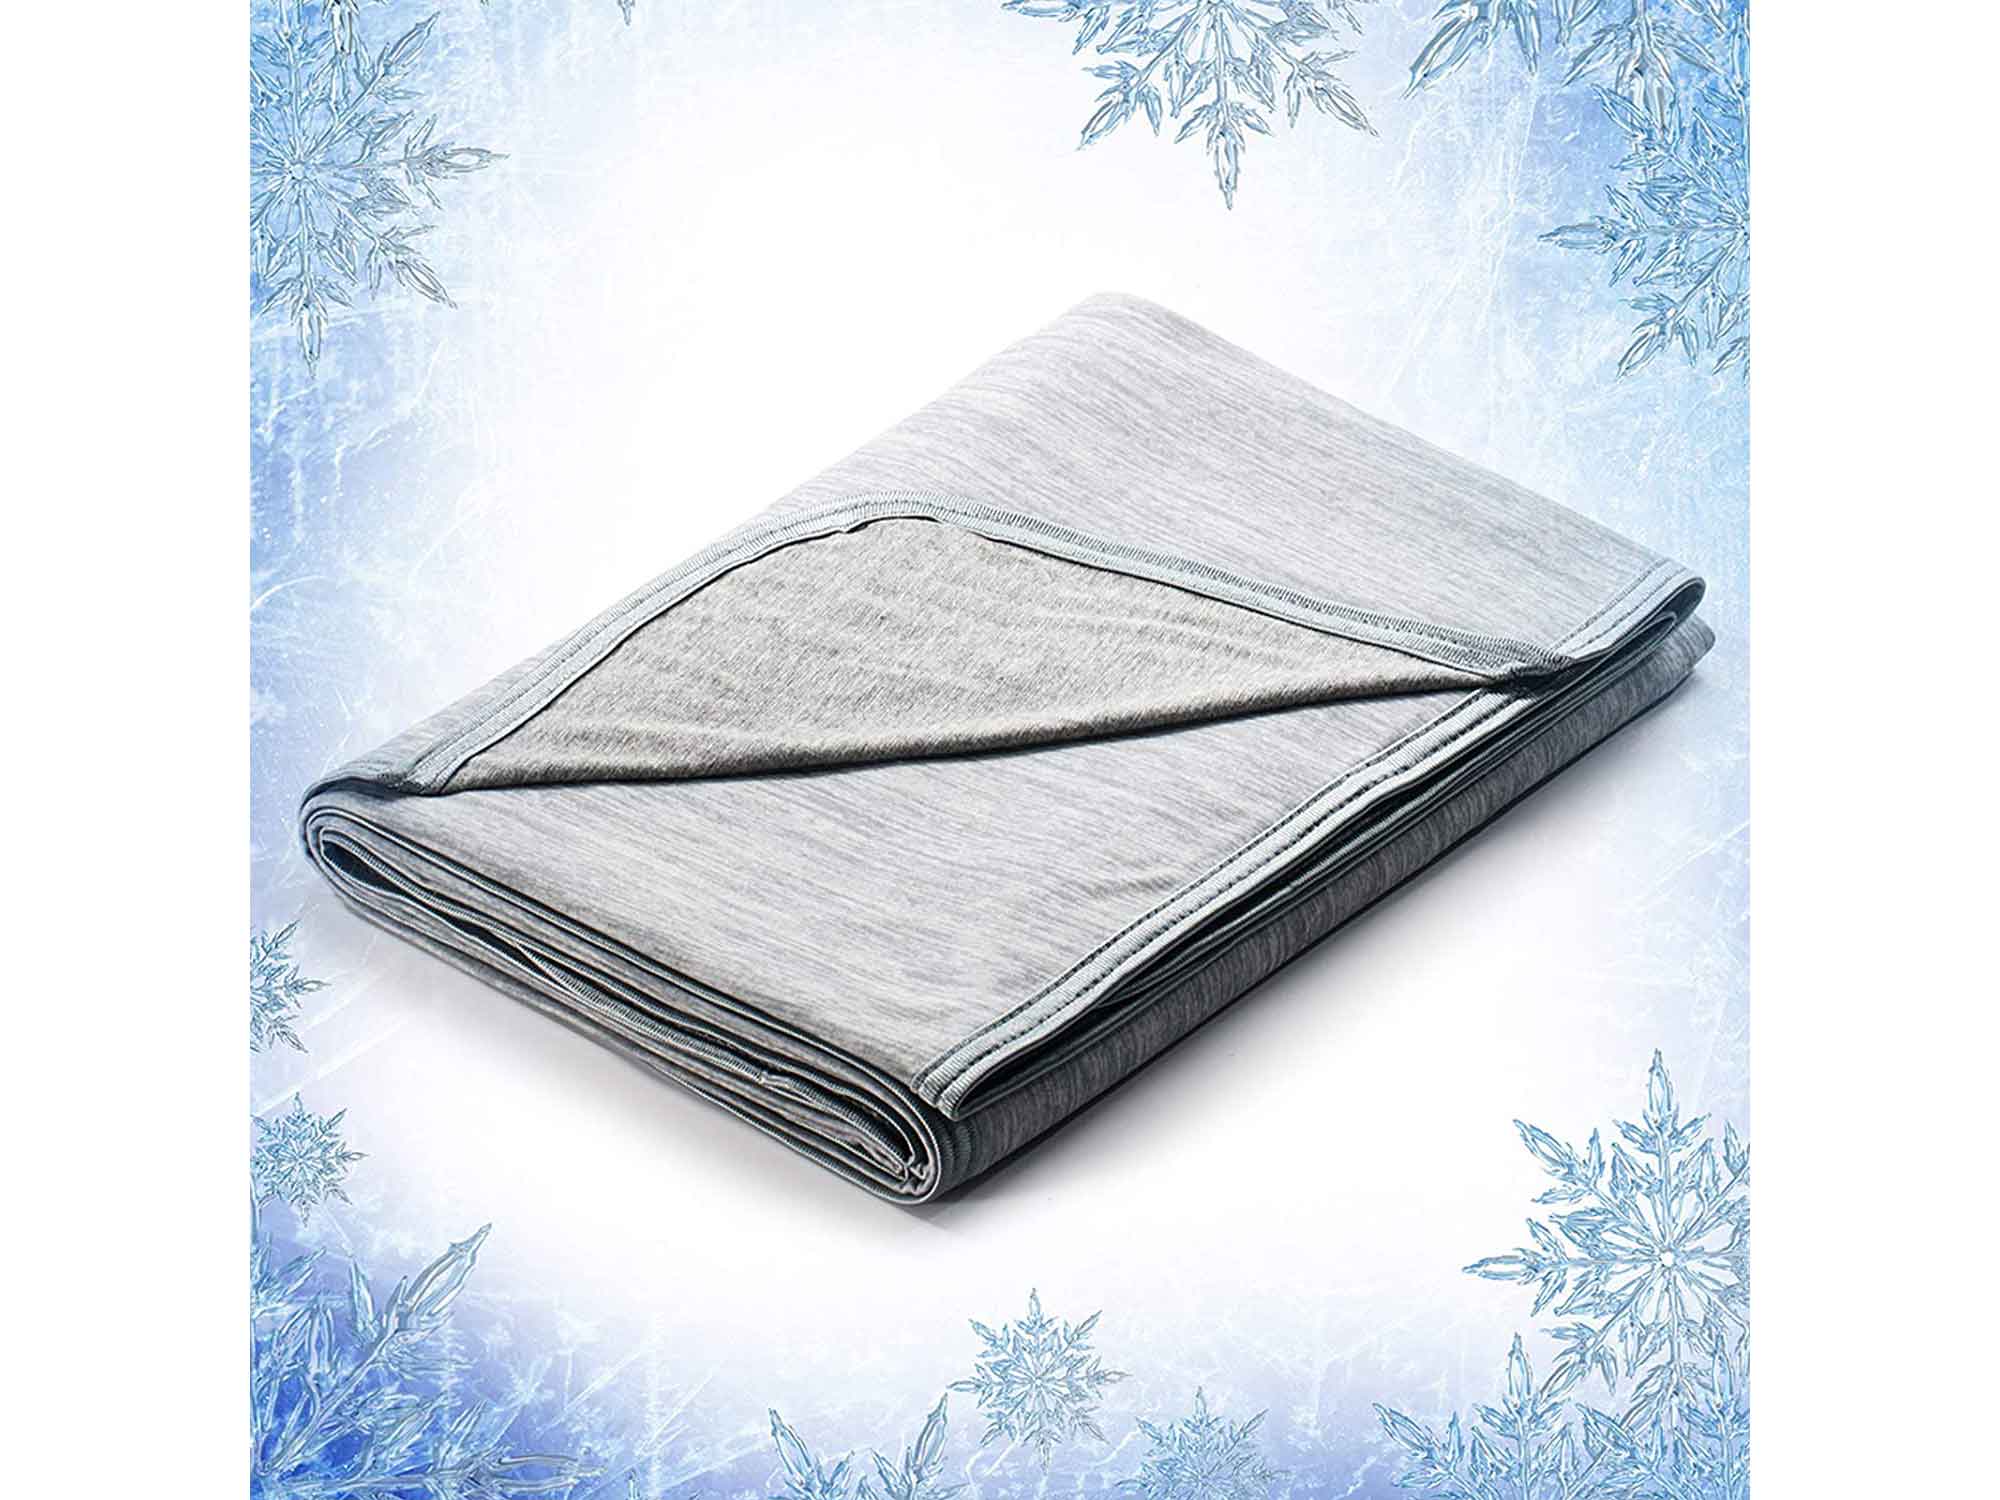 Elegear Revolutionary Cooling Blanket Absorbs Heat to Keep Adults, Children, Babies Cool on Warm Nights. Japanese Q-Max 0.4 Arc-Chill Cooling Fiber, Breathable, Comfortable, Hypo-Allergenic